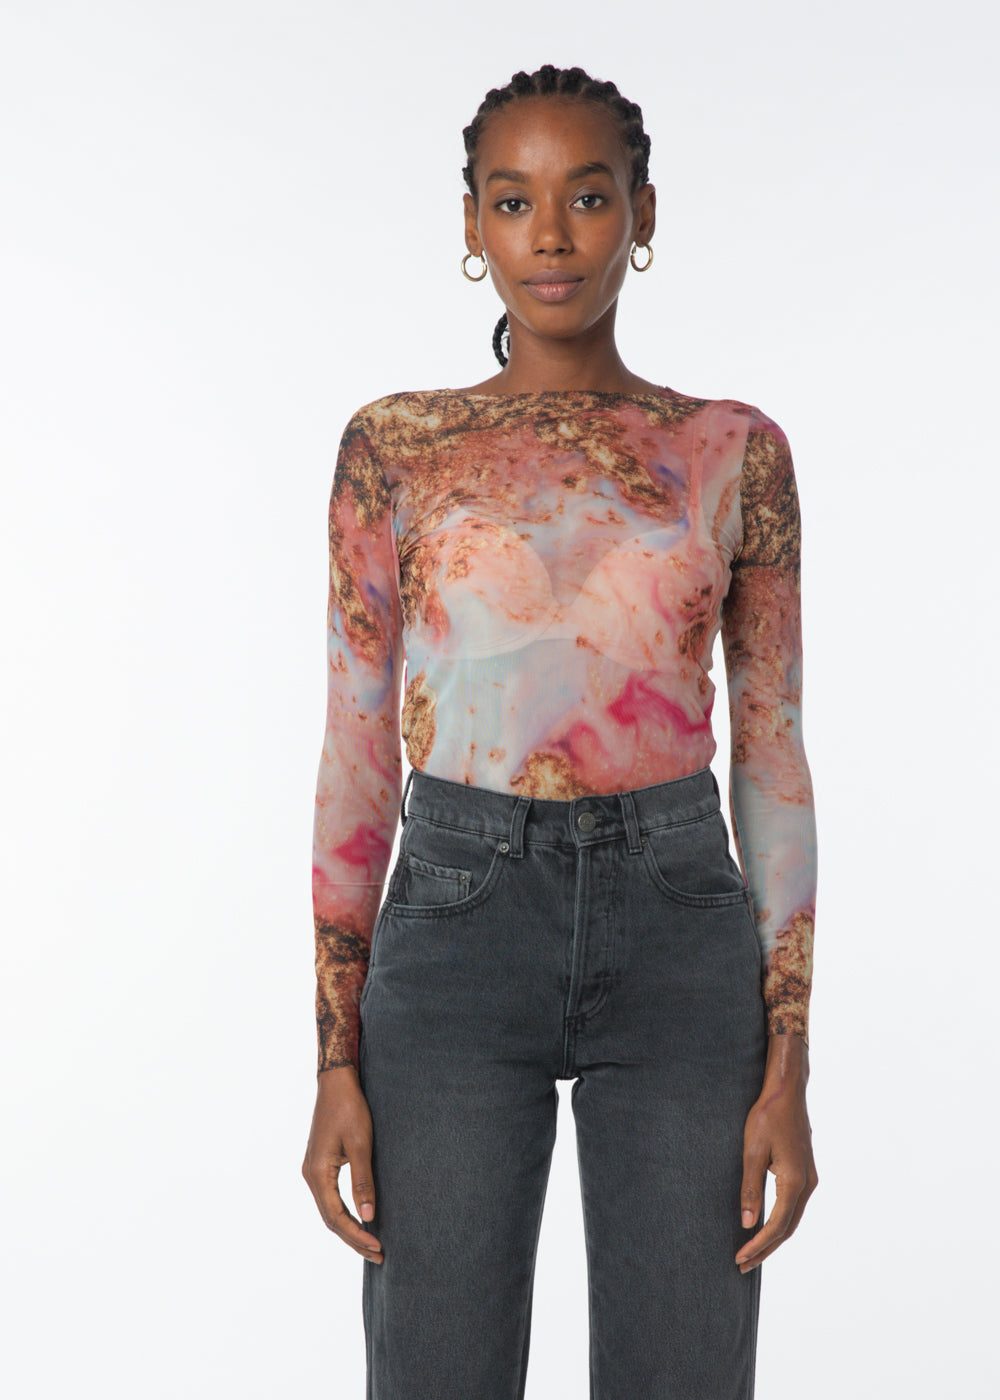 Web Exclusive Print - Galaxy Giselle Mesh Top